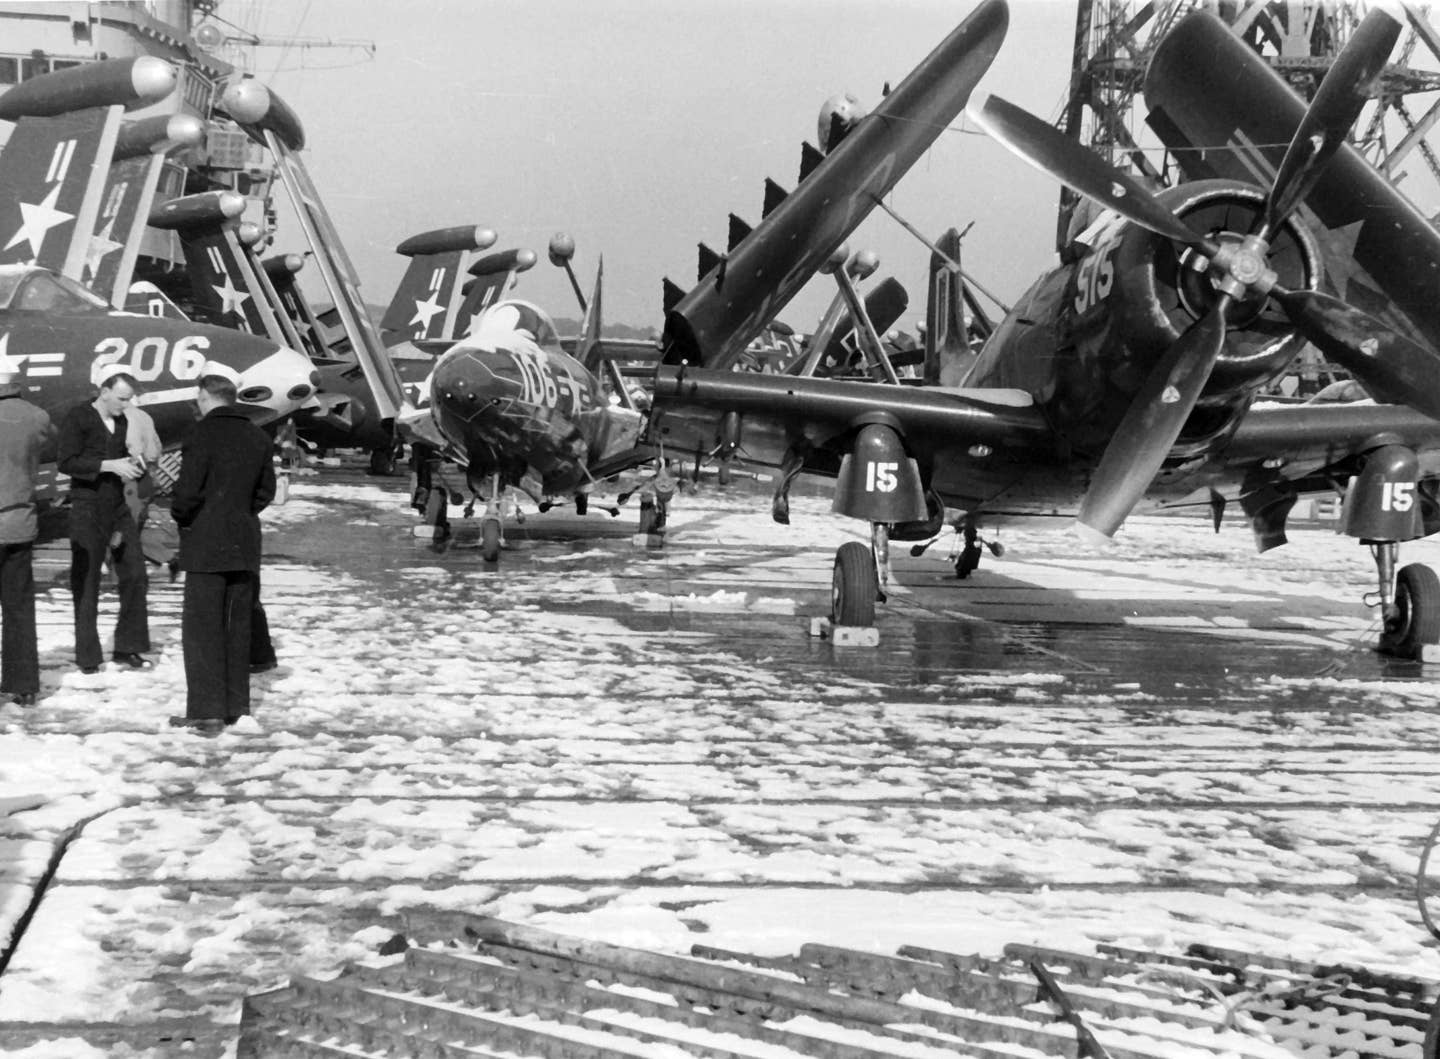 F9F-5&nbsp;Panthers of VF-121 and VF-122, and AD-3&nbsp;Skyraiders of Attack Squadron 125 (VA-125) on the snow-covered deck of the aircraft carrier USS&nbsp;<em>Oriskany</em> in Japanese waters. This was during the Korean deployment from September 1952 to May 1953. <em>U.S. Navy National Museum of Naval Aviation</em>